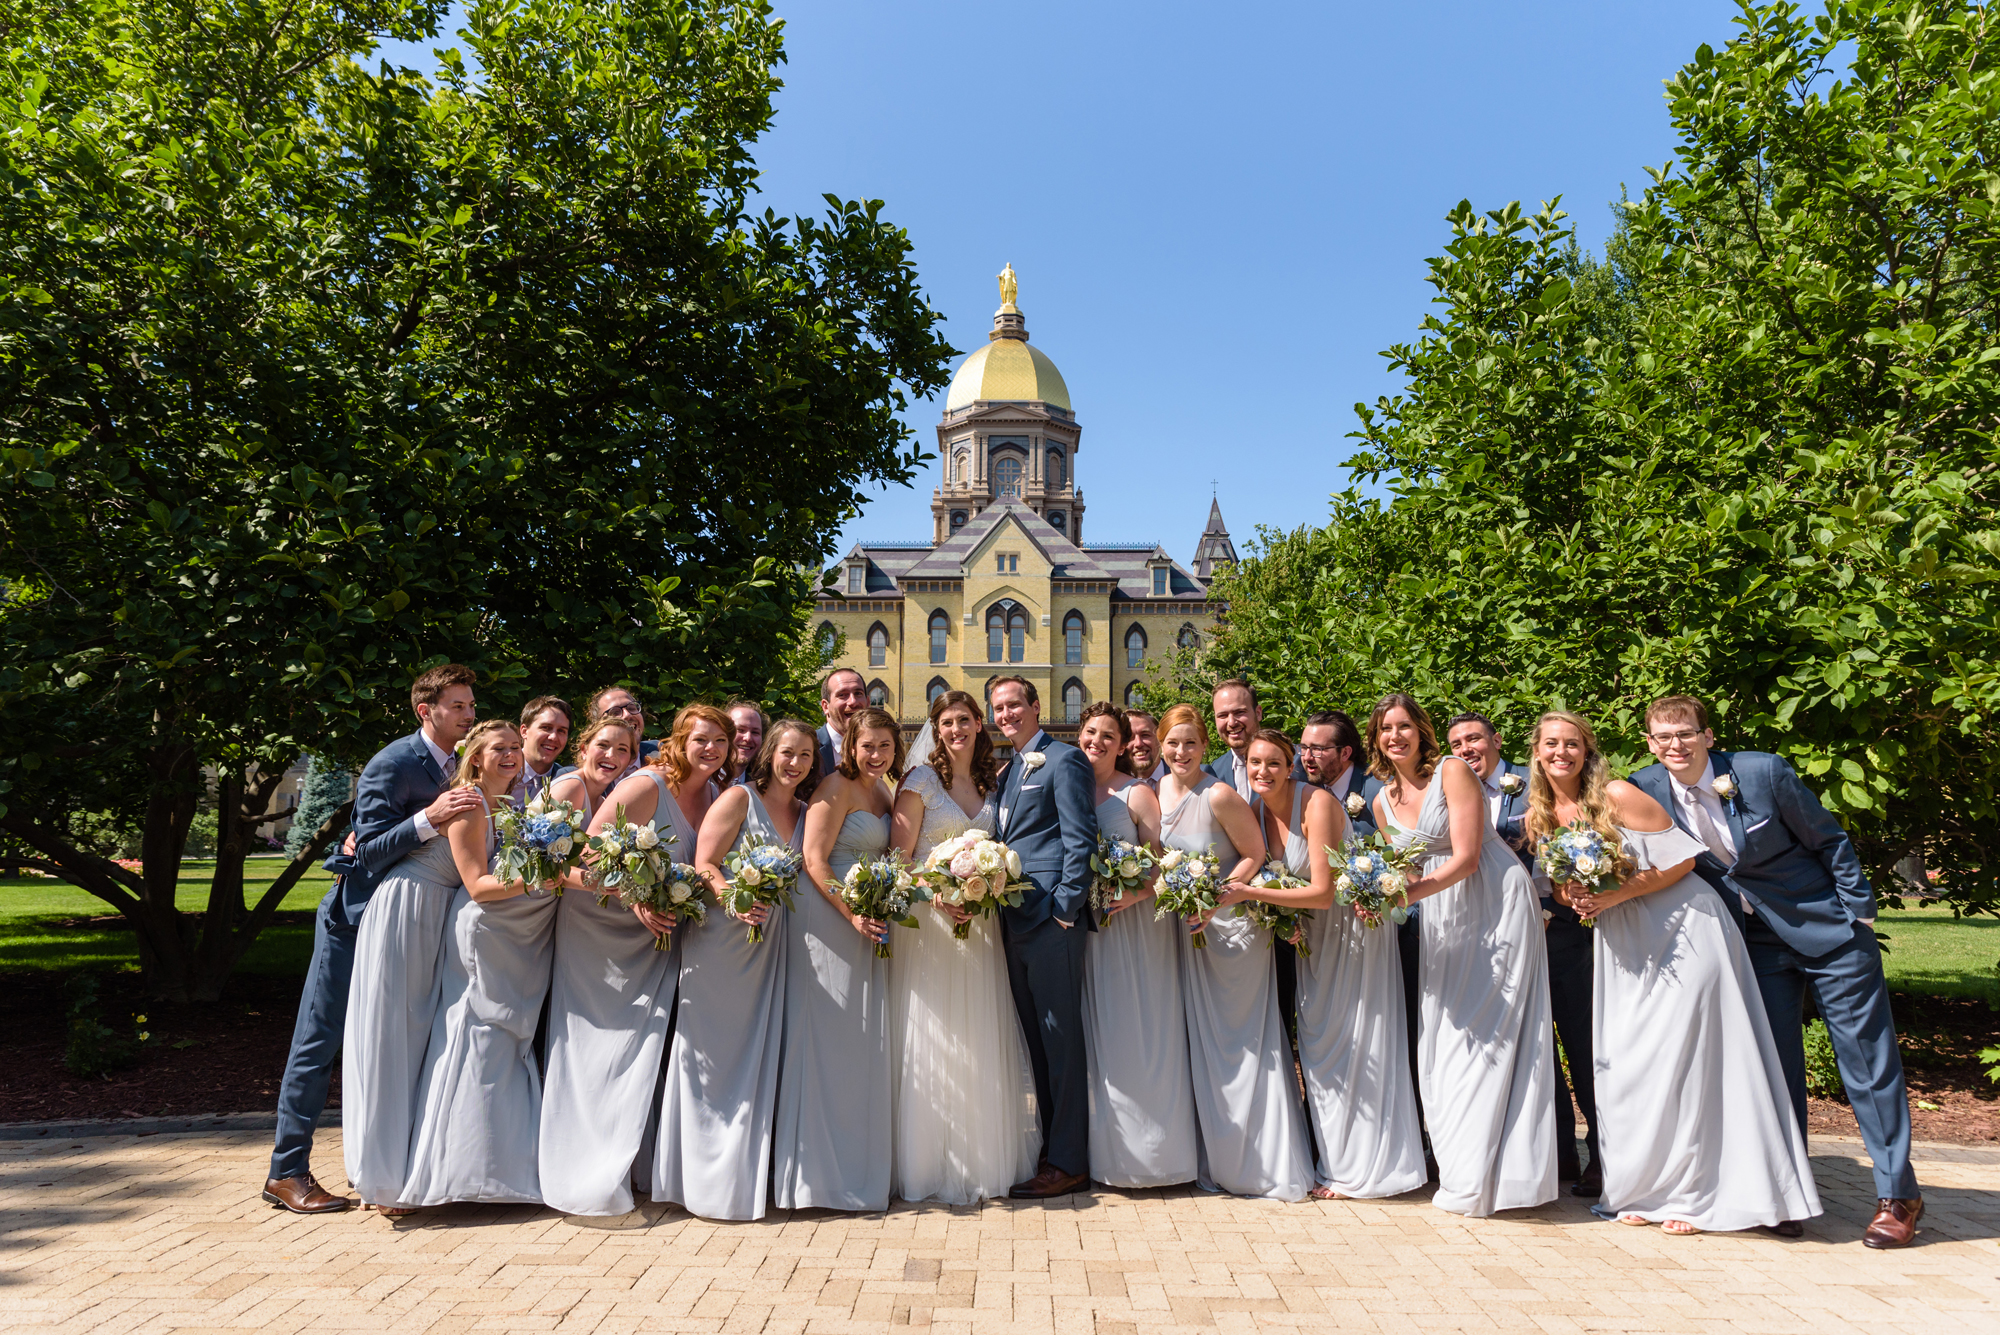 Bridal Party in front of the Golden Dome after a wedding ceremony at the Basilica of the Sacred Heart on the campus of the University of Notre Dame